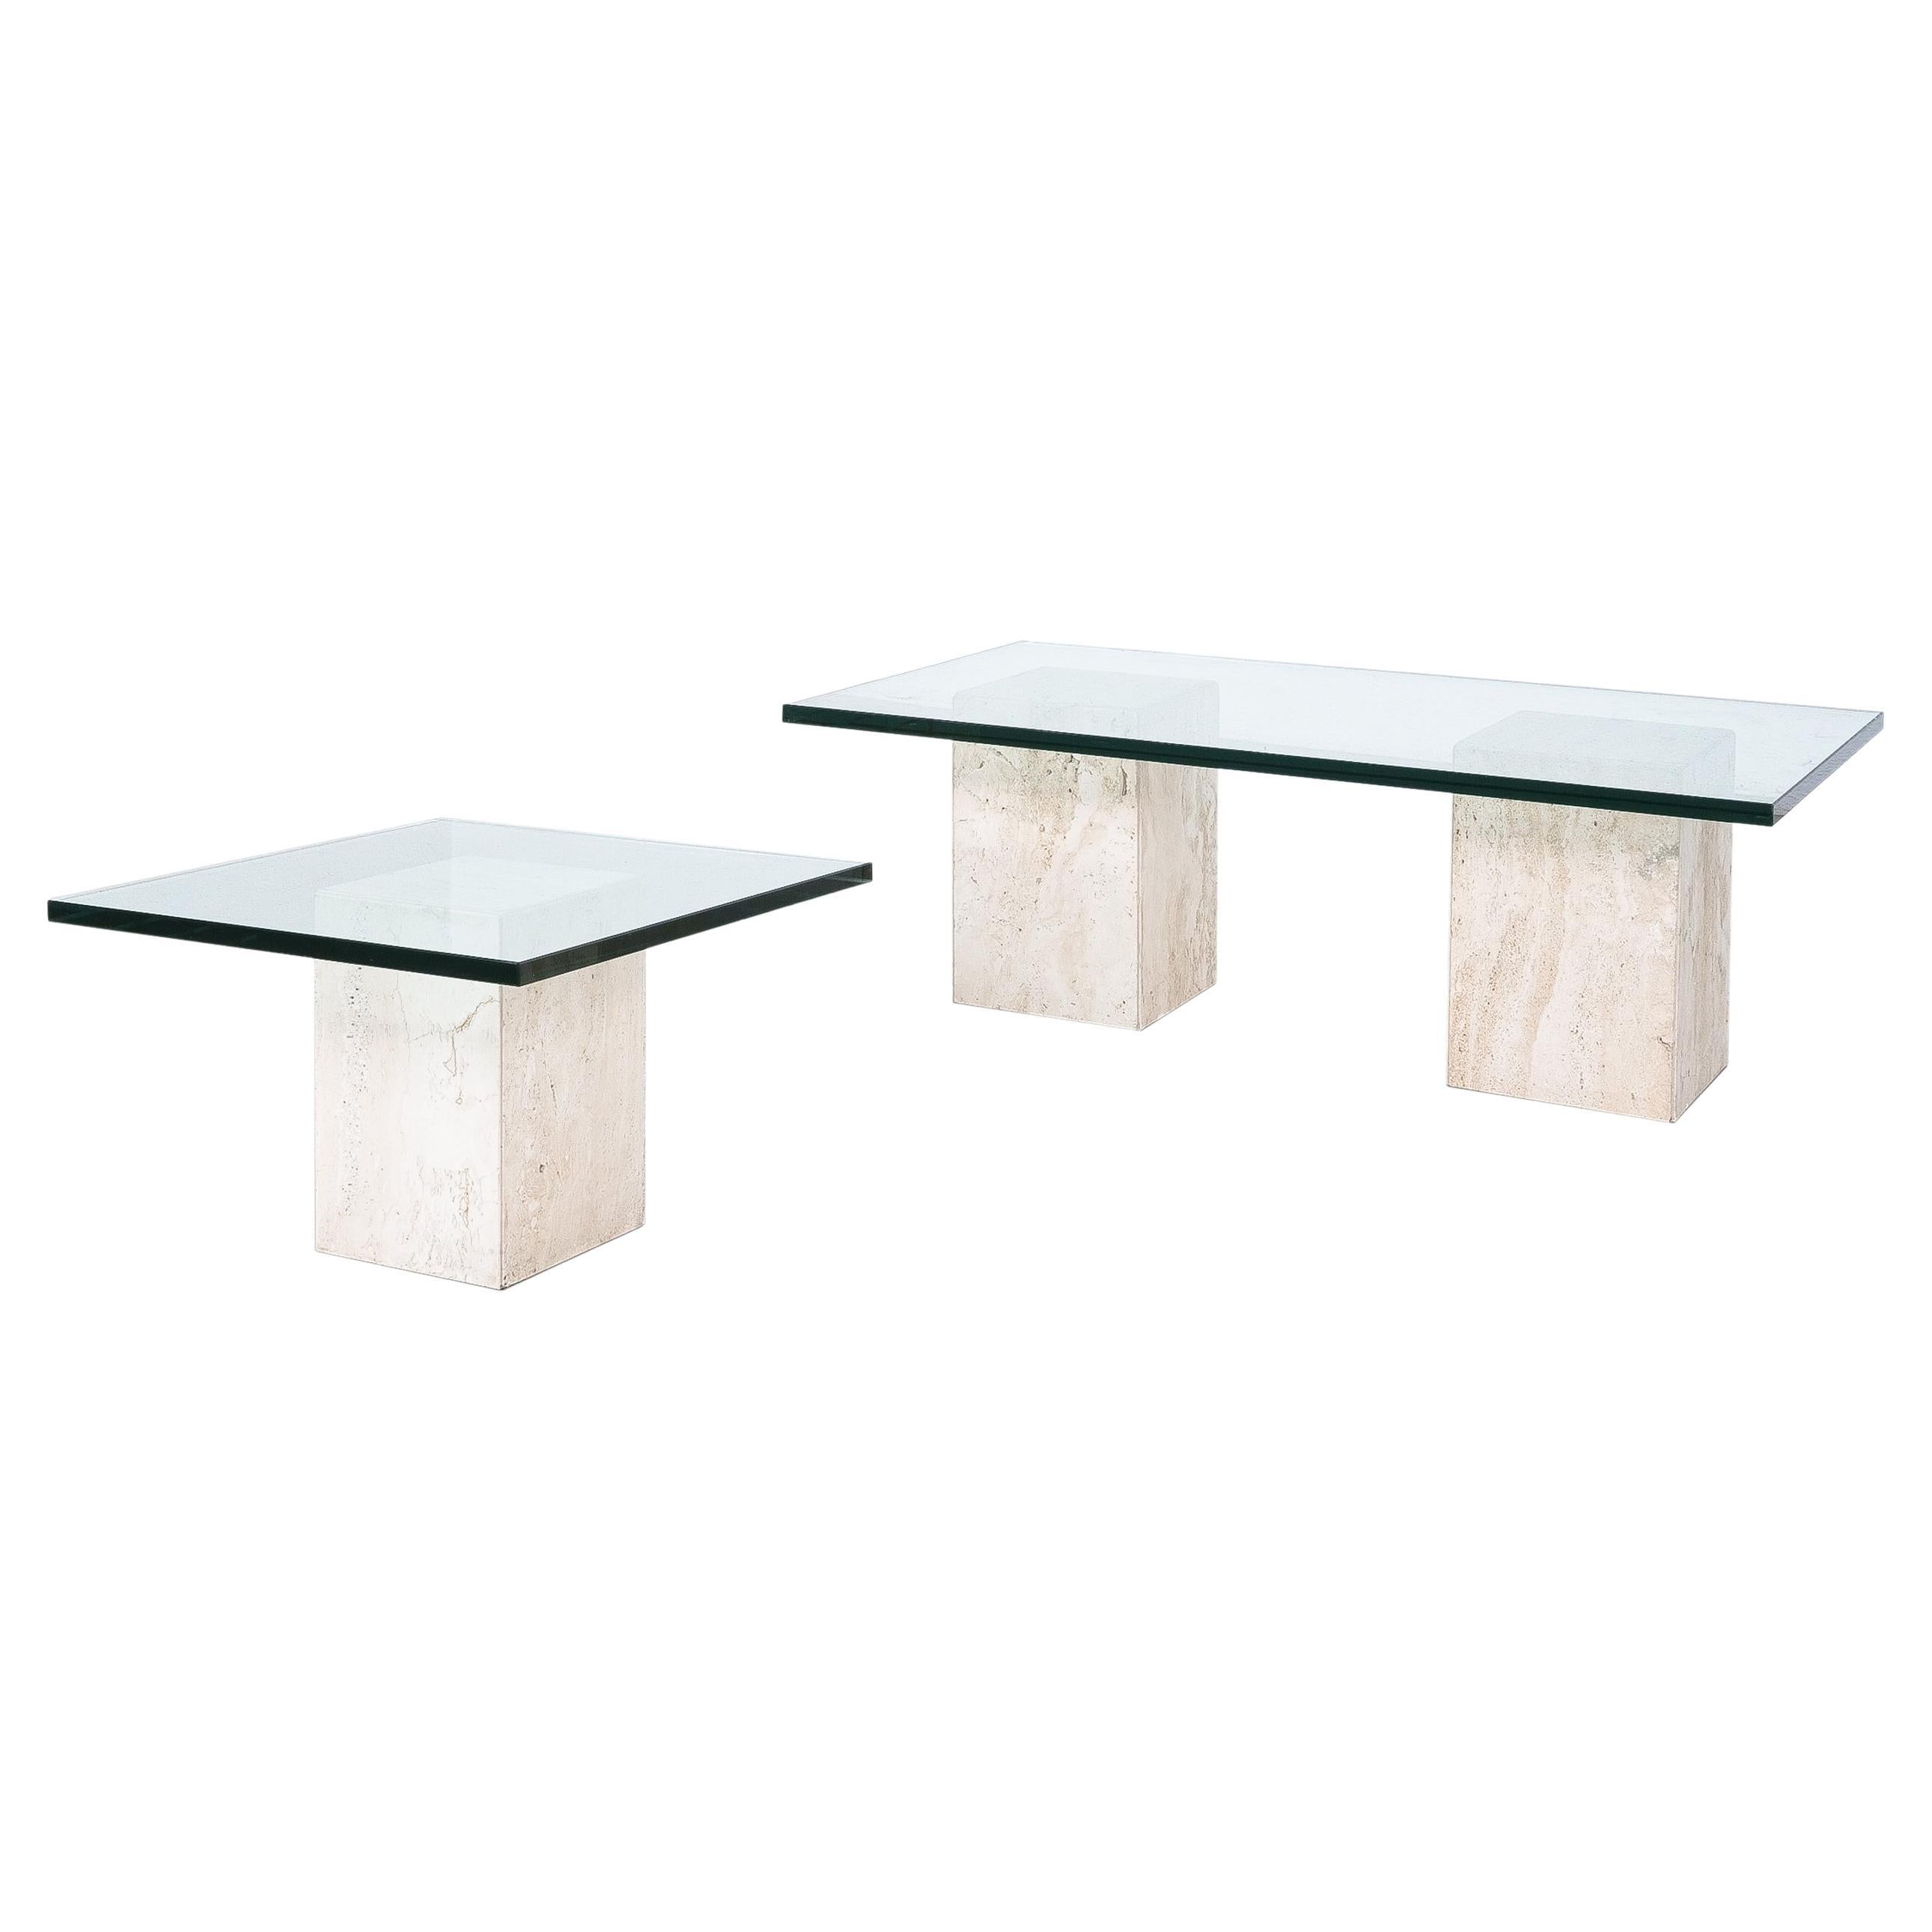 Travertine Tables from Three Blocks with Glass Tops, Italy, circa 1970 For Sale